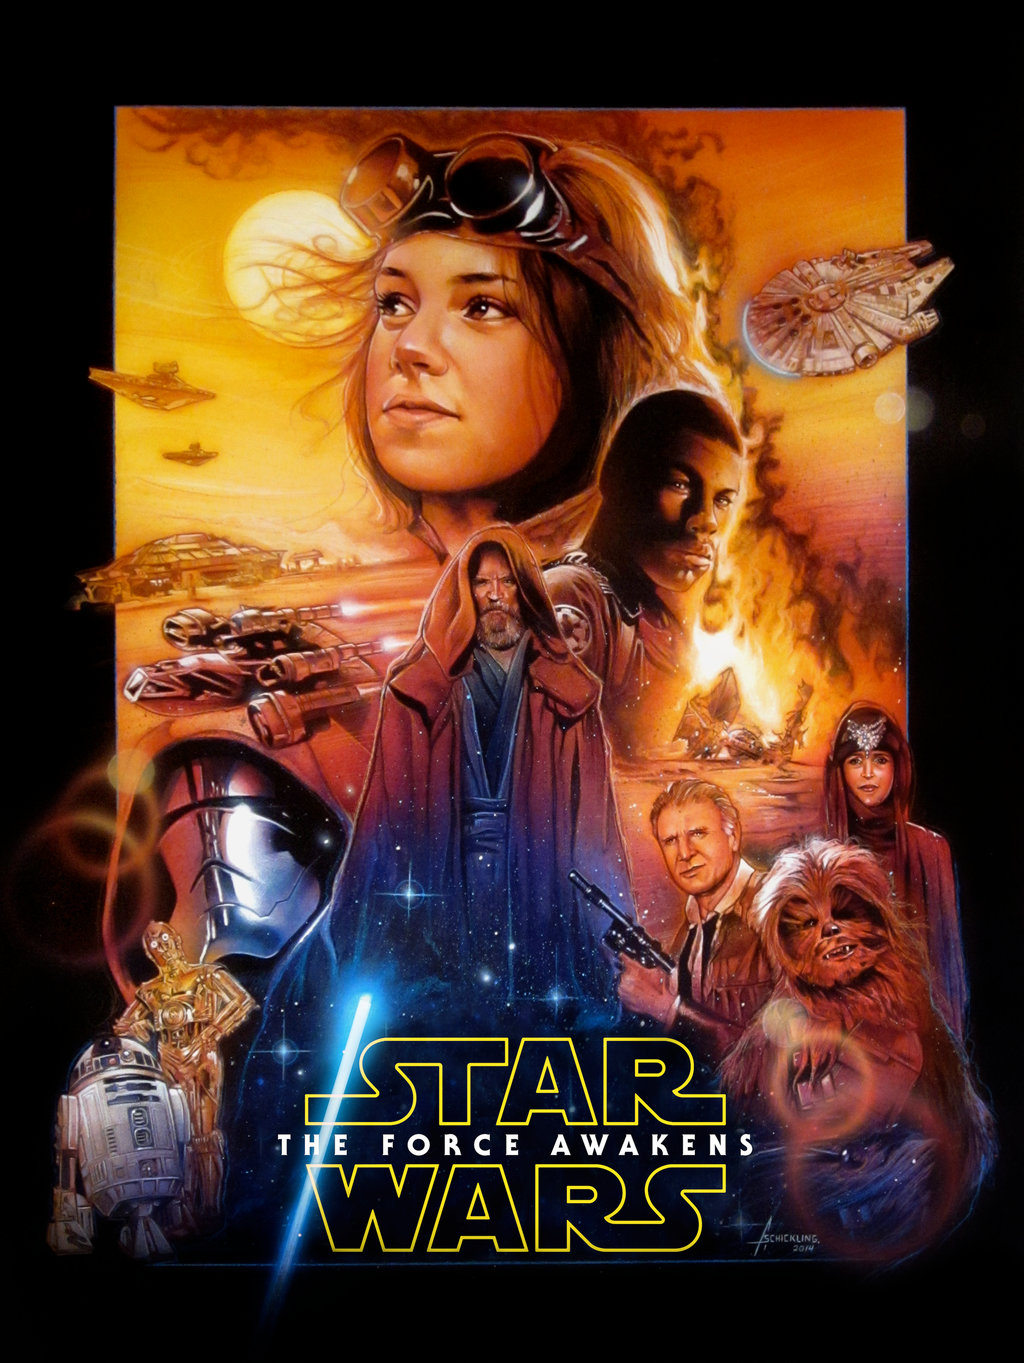 Star Wars The Force Awakens Poster by rampantimaginationA on